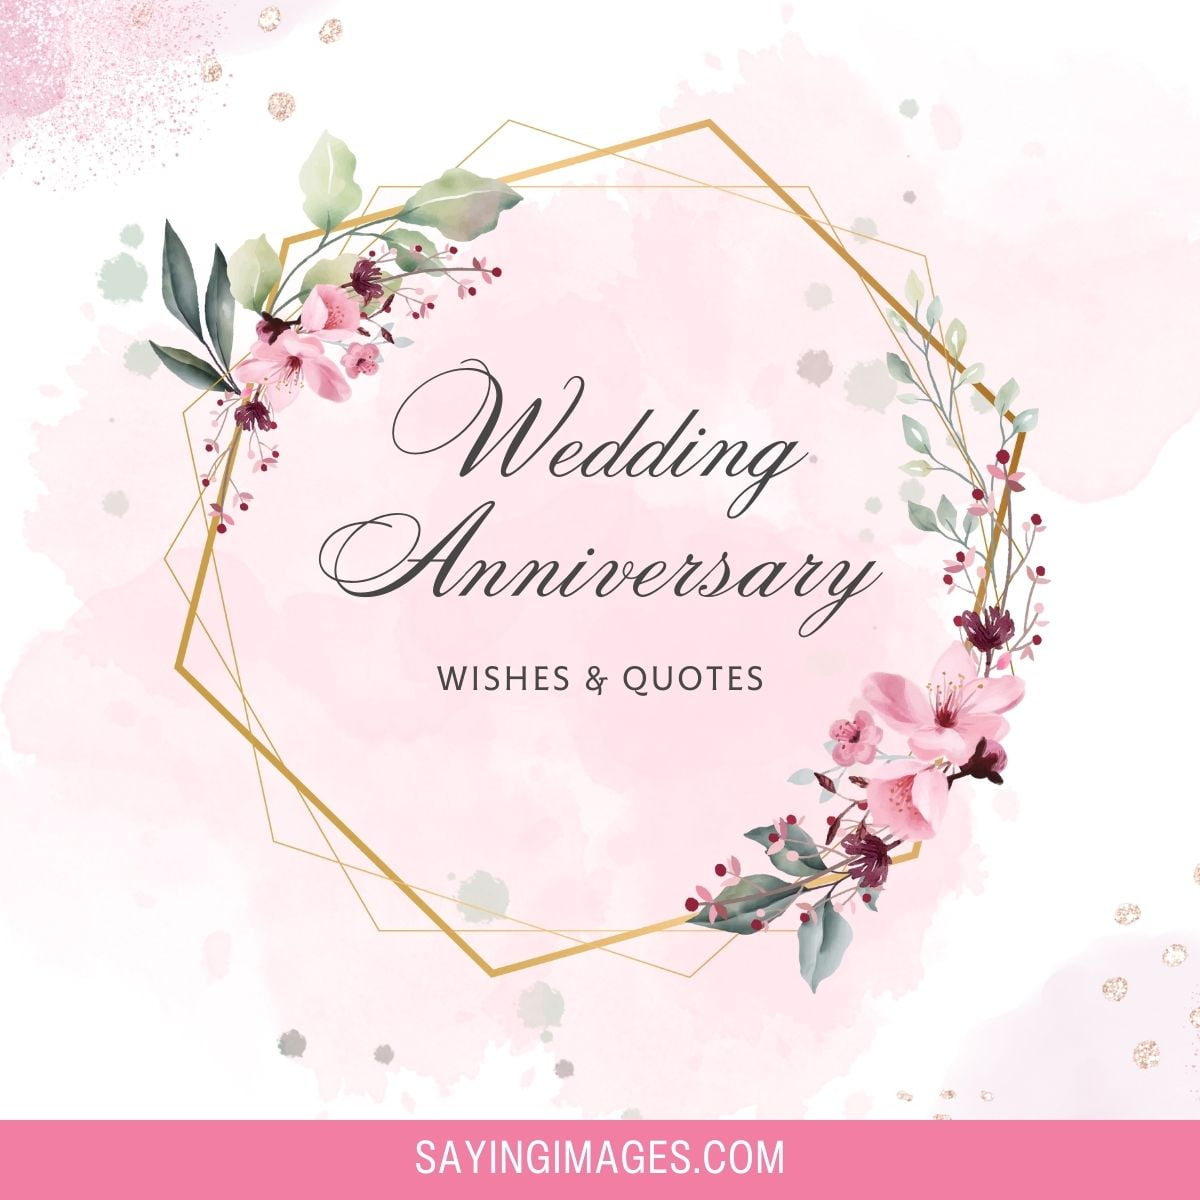 Wedding Anniversary Wishes & Quotes